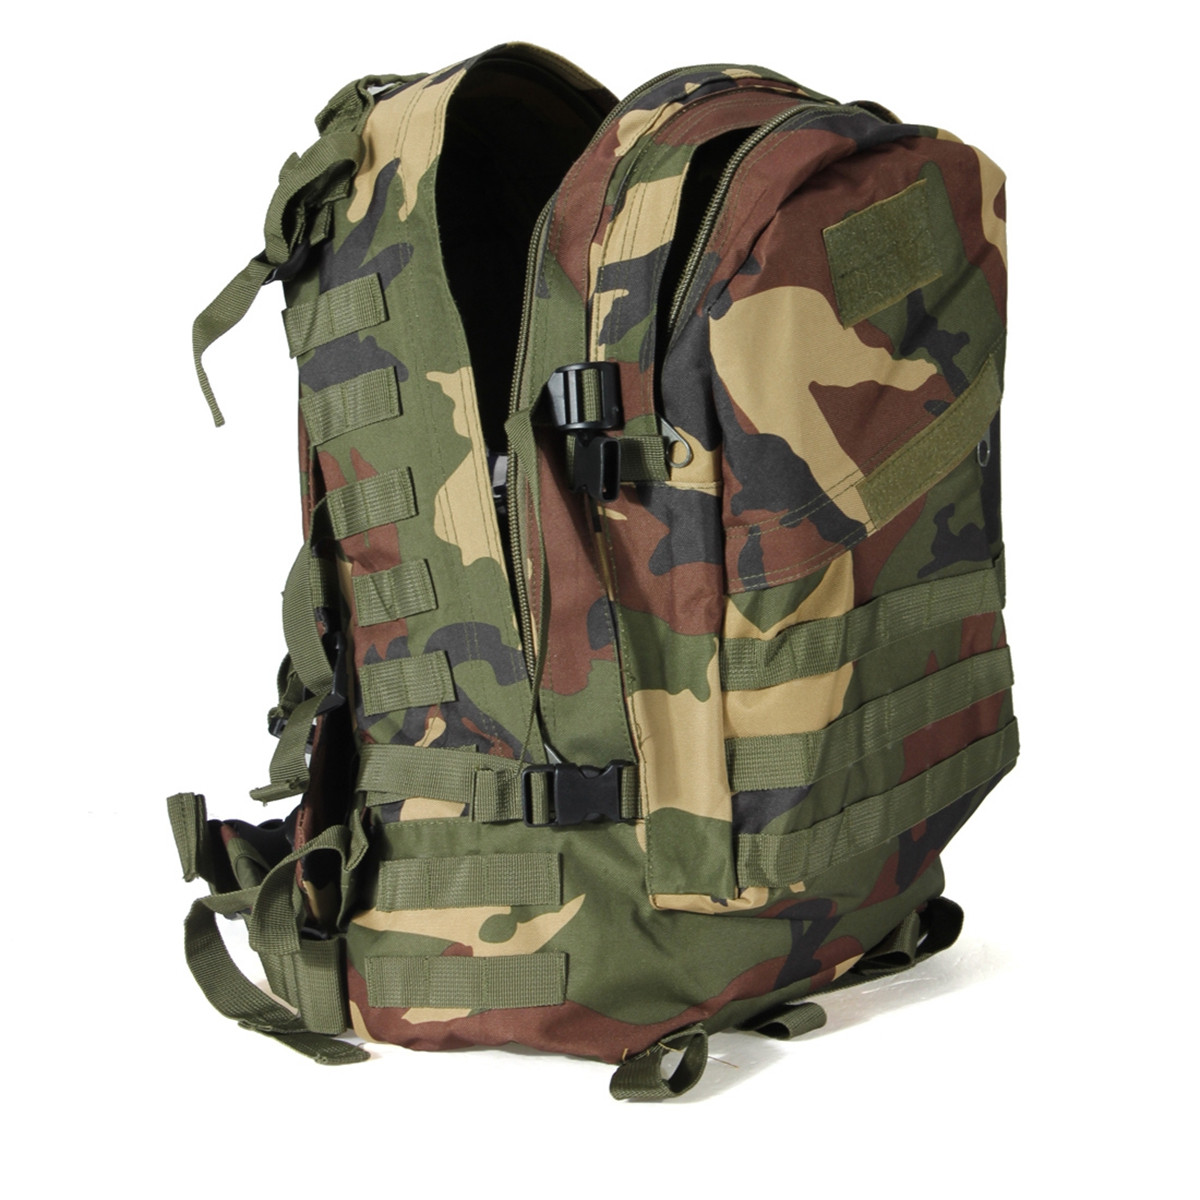 AMTOA-40L-3D-Outdoor-Molle-Military-Tactical-Rucksack-Backpack-Camping-Hiking-Bag-1817259-11